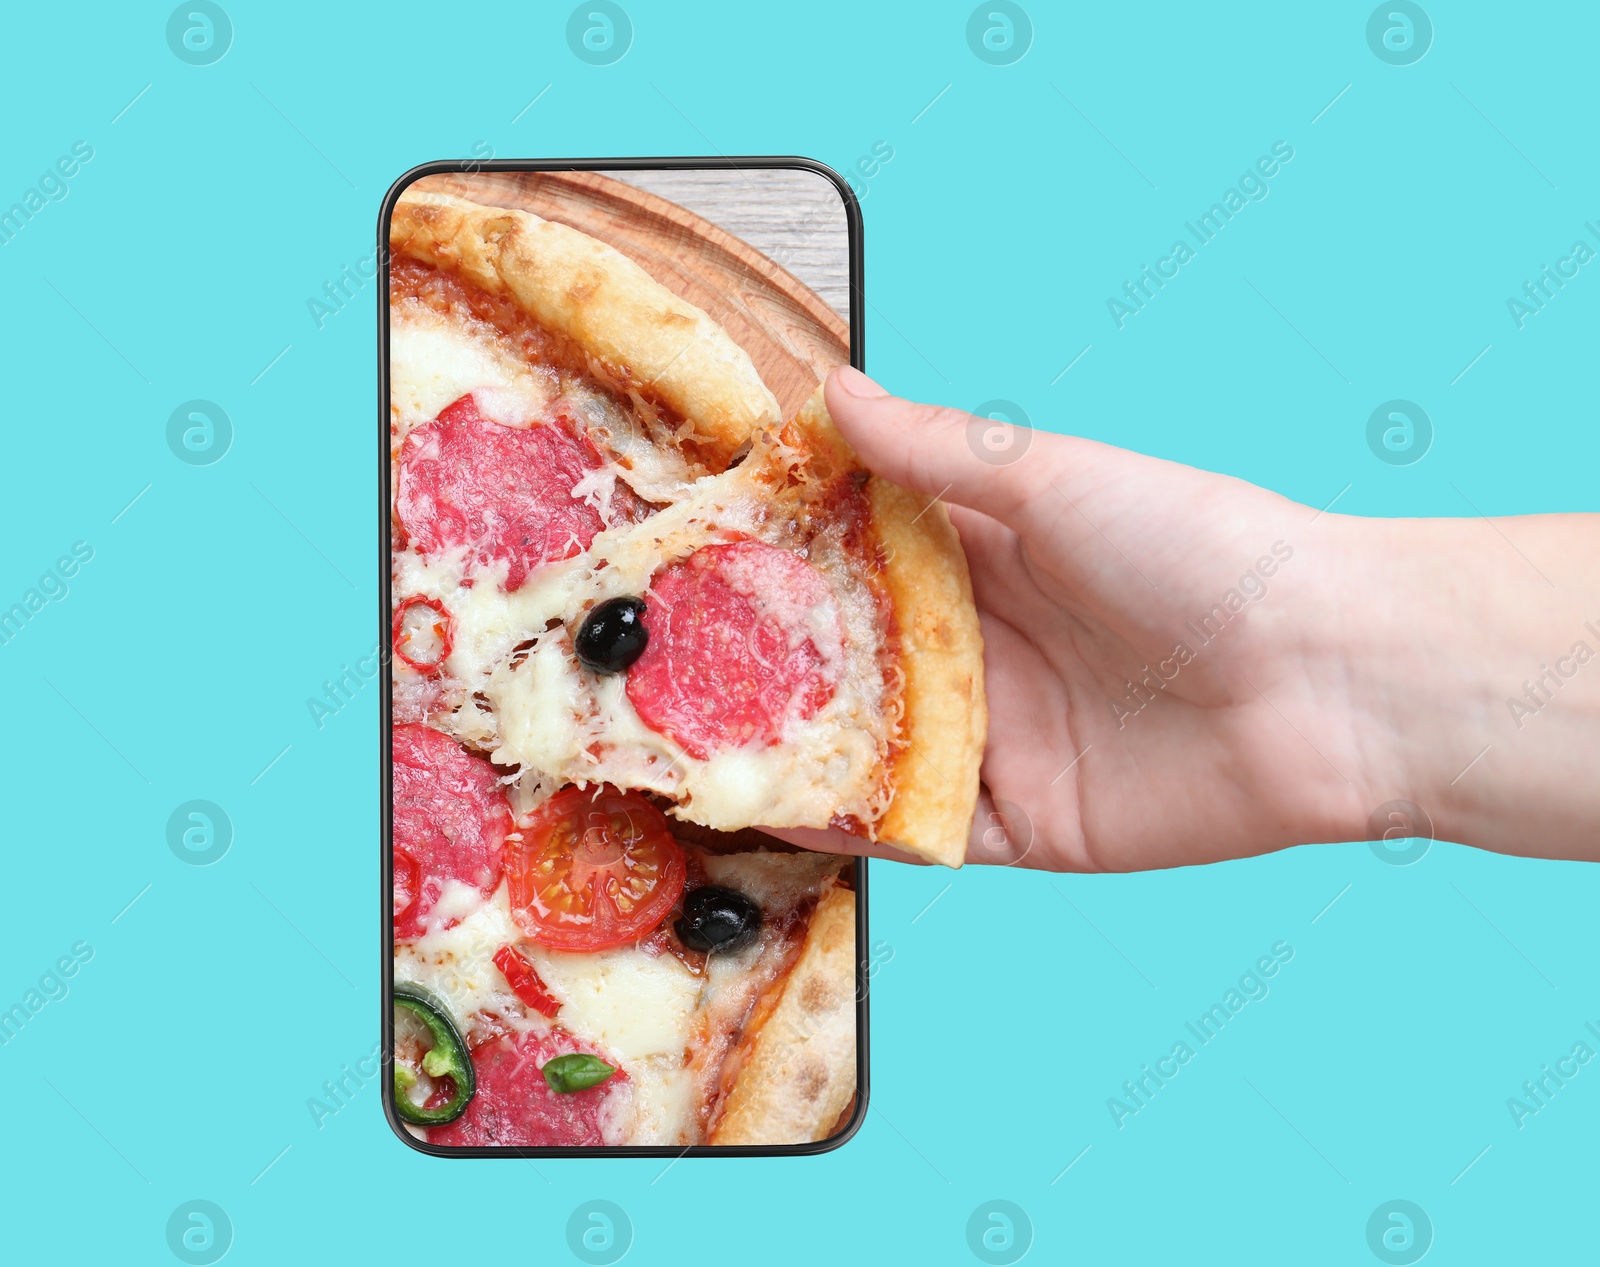 Image of Online food ordering. Woman taking slice of pizza from smartphone screen against light blue background, closeup